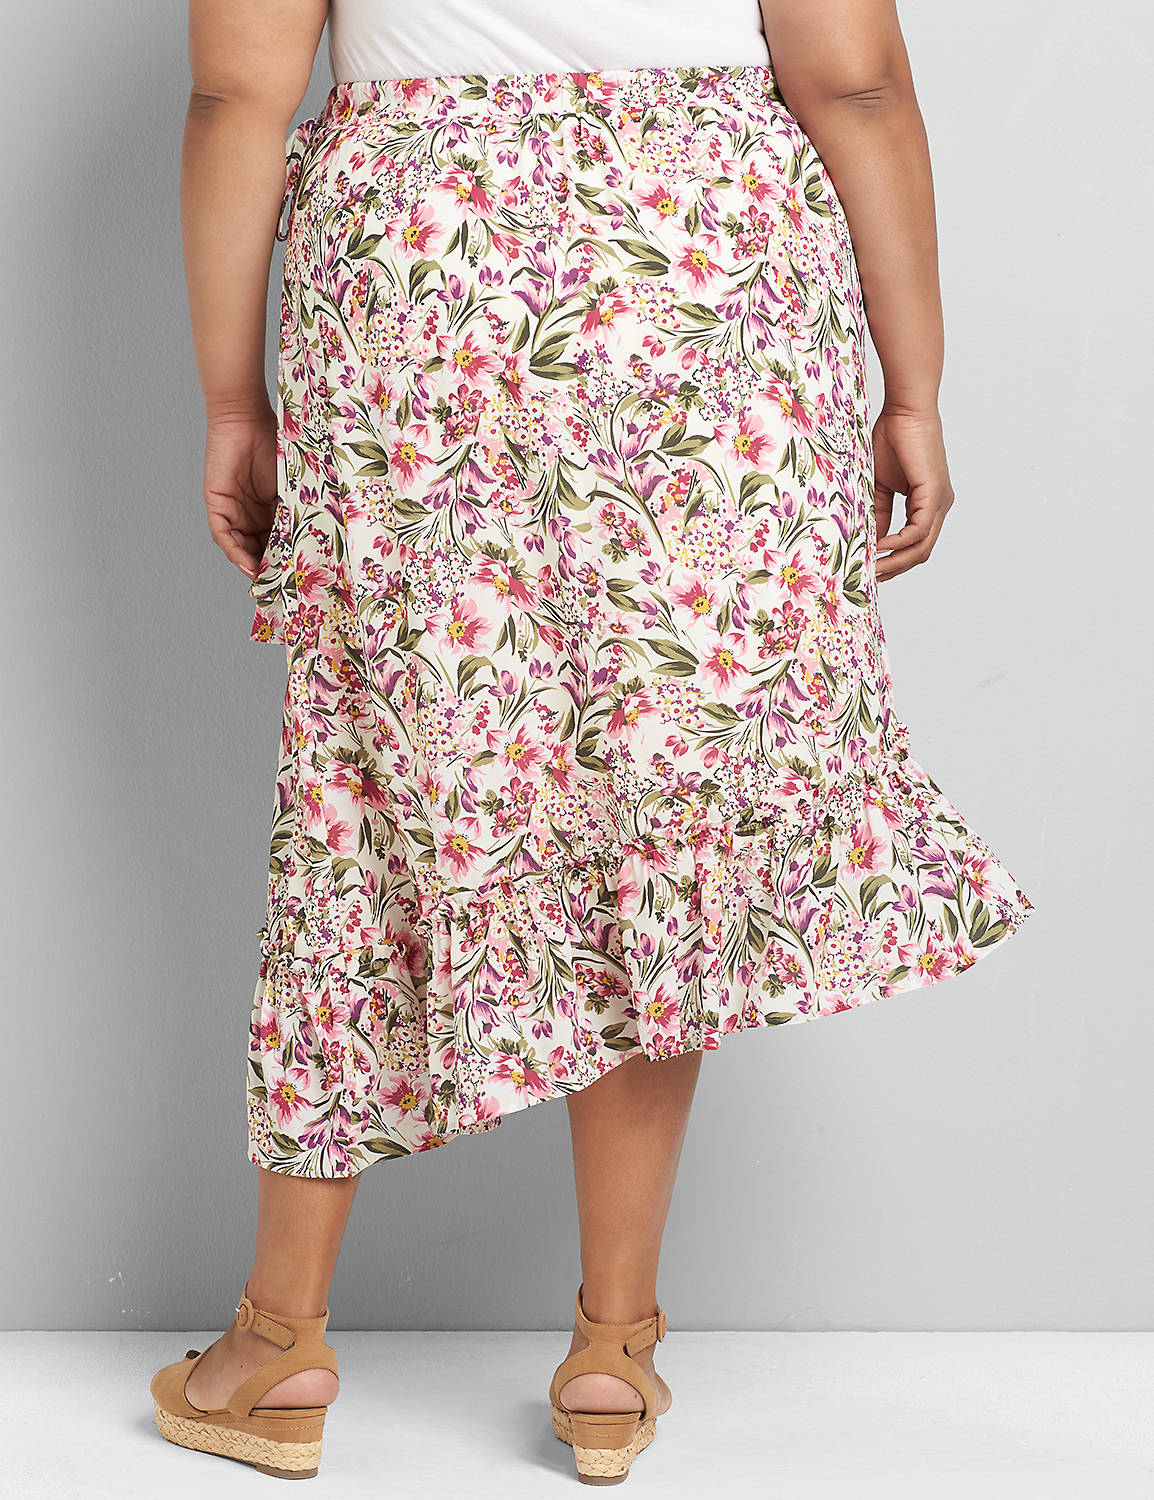 1119174 MIDI WRAP SKIRT W/TIE 1119174:LBSP21257_EvelynFloral_C1:18/20 Product Image 2